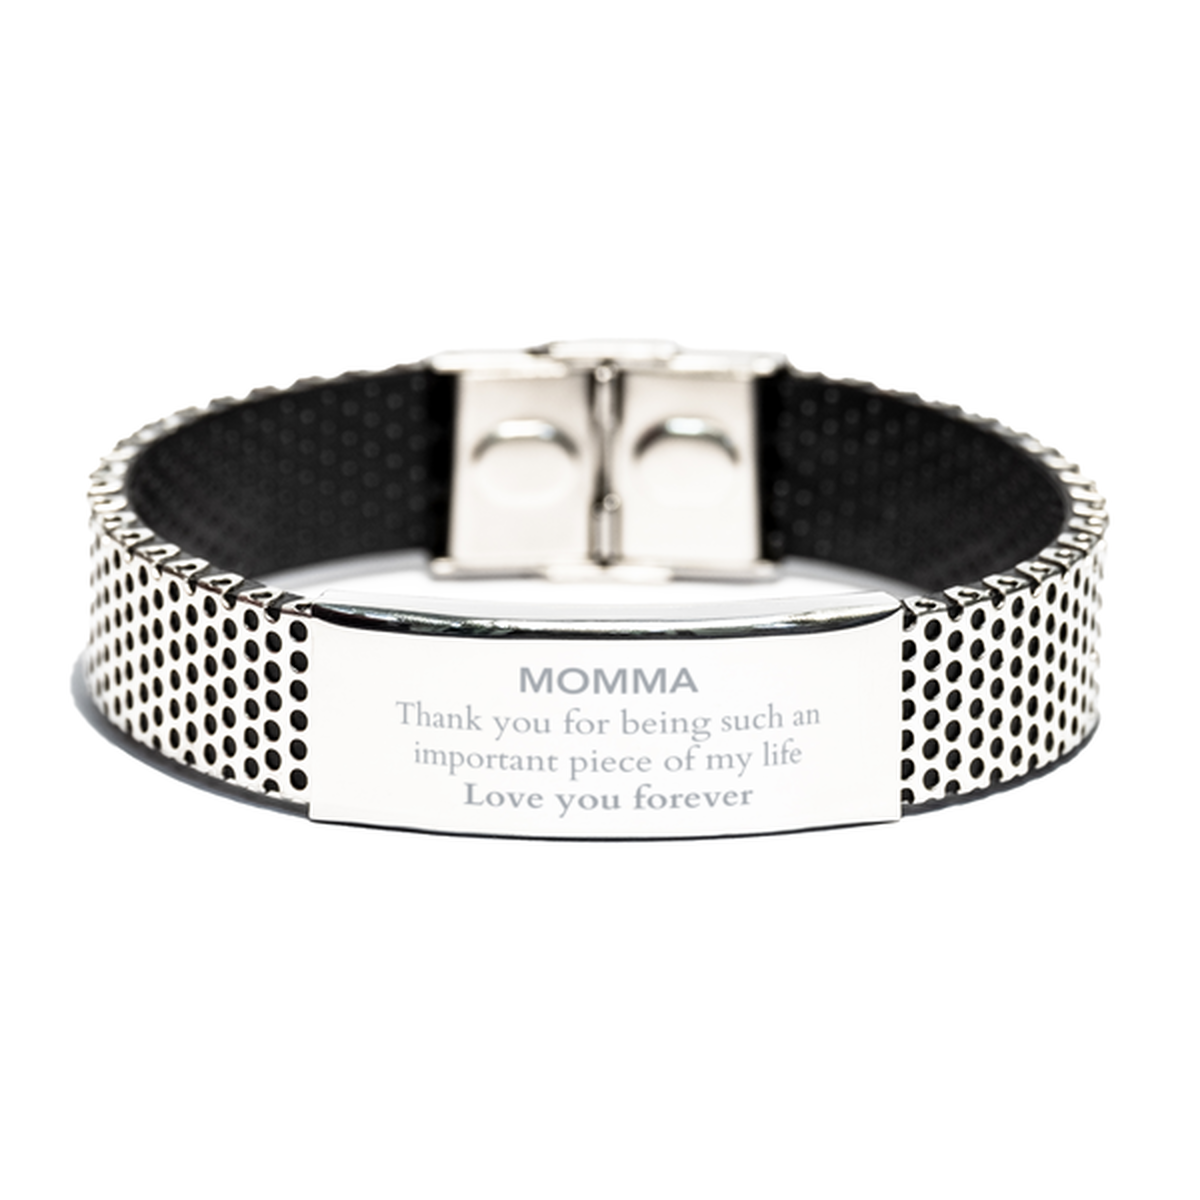 Appropriate Momma Stainless Steel Bracelet Epic Birthday Gifts for Momma Thank you for being such an important piece of my life Momma Christmas Mothers Fathers Day